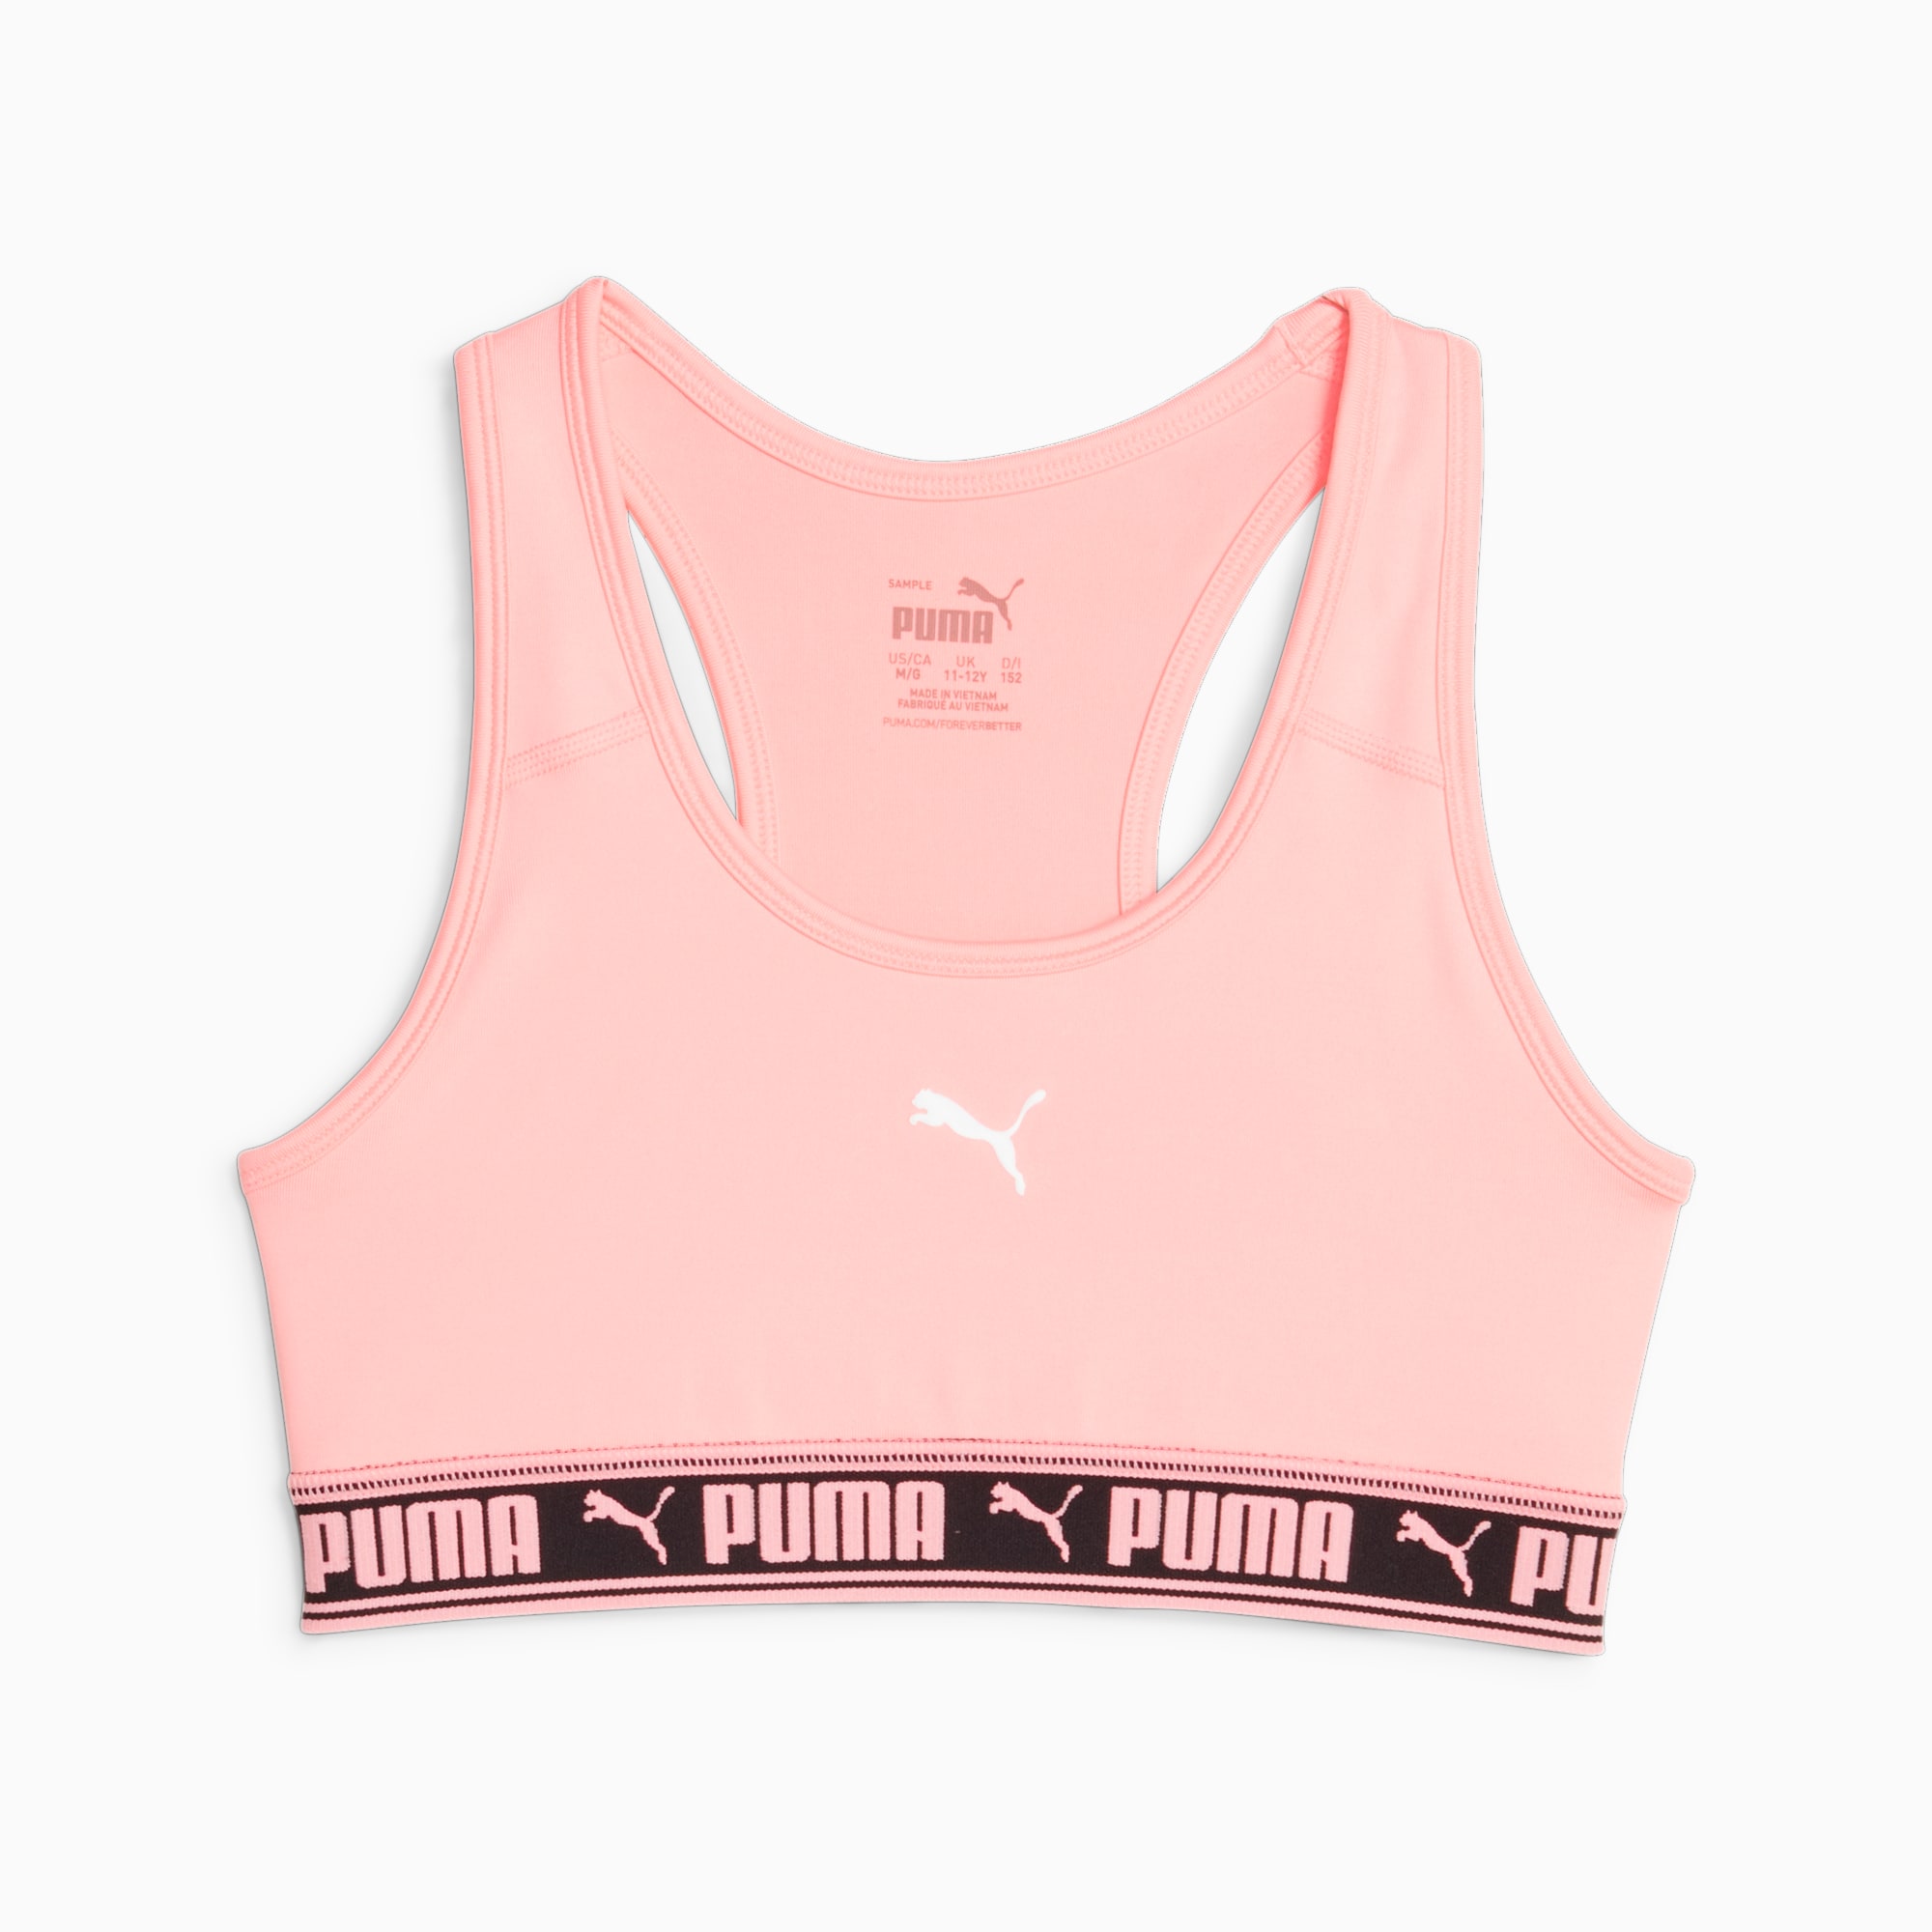 PUMA Strong Bra Youth, Koral Ice, Size 116